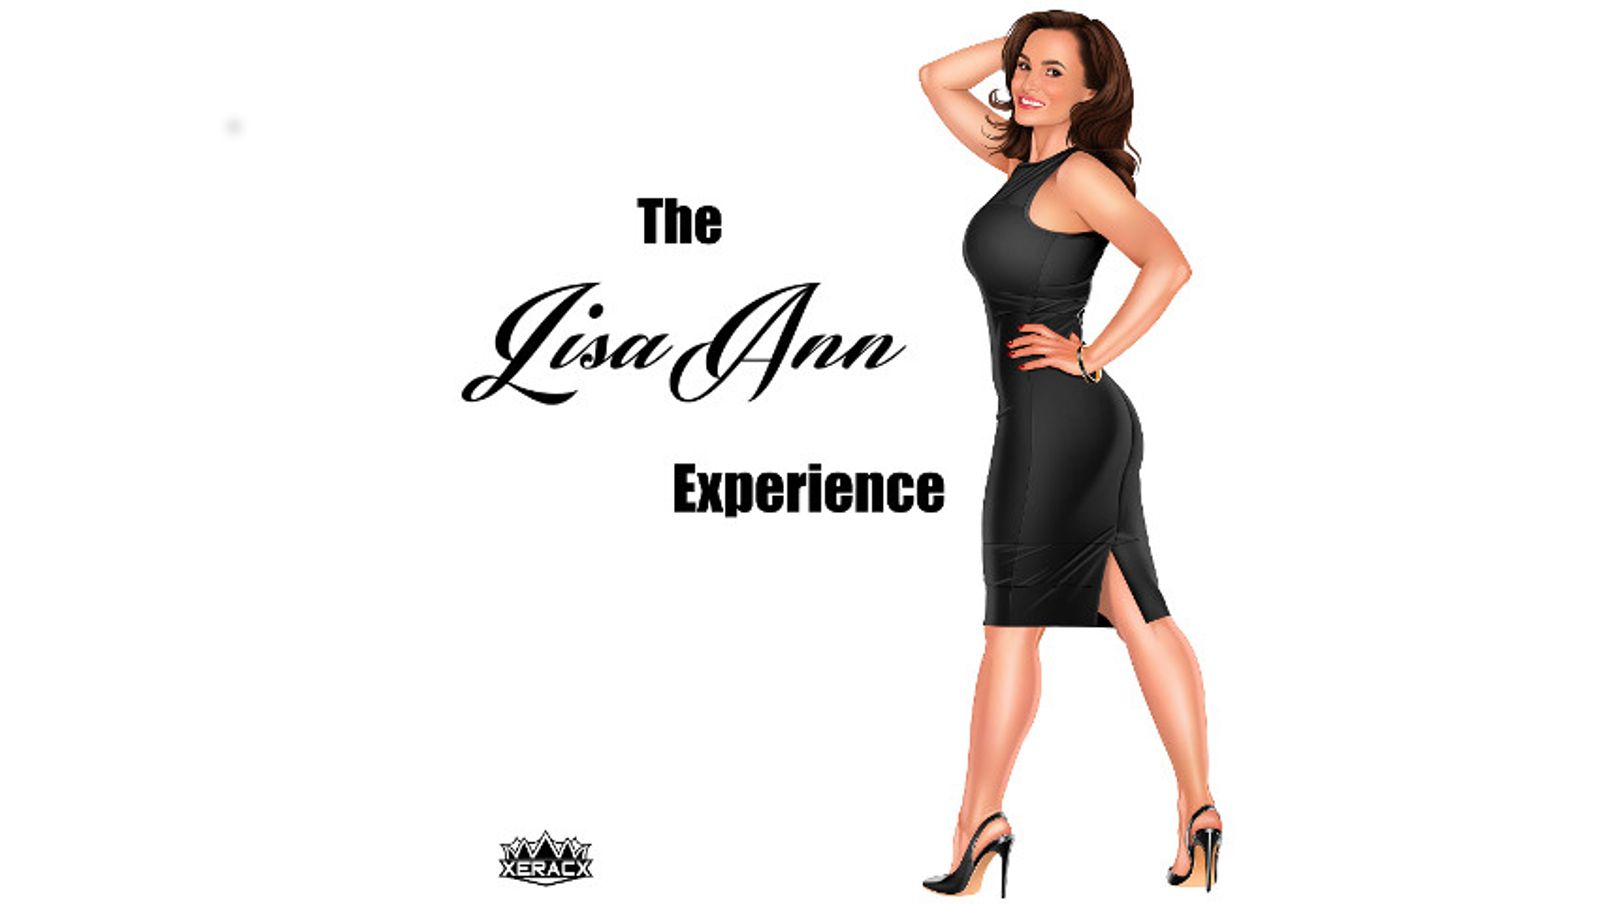 Lisa Ann Welcomes Kelli Provocateur to 'The Lisa Ann Experience'